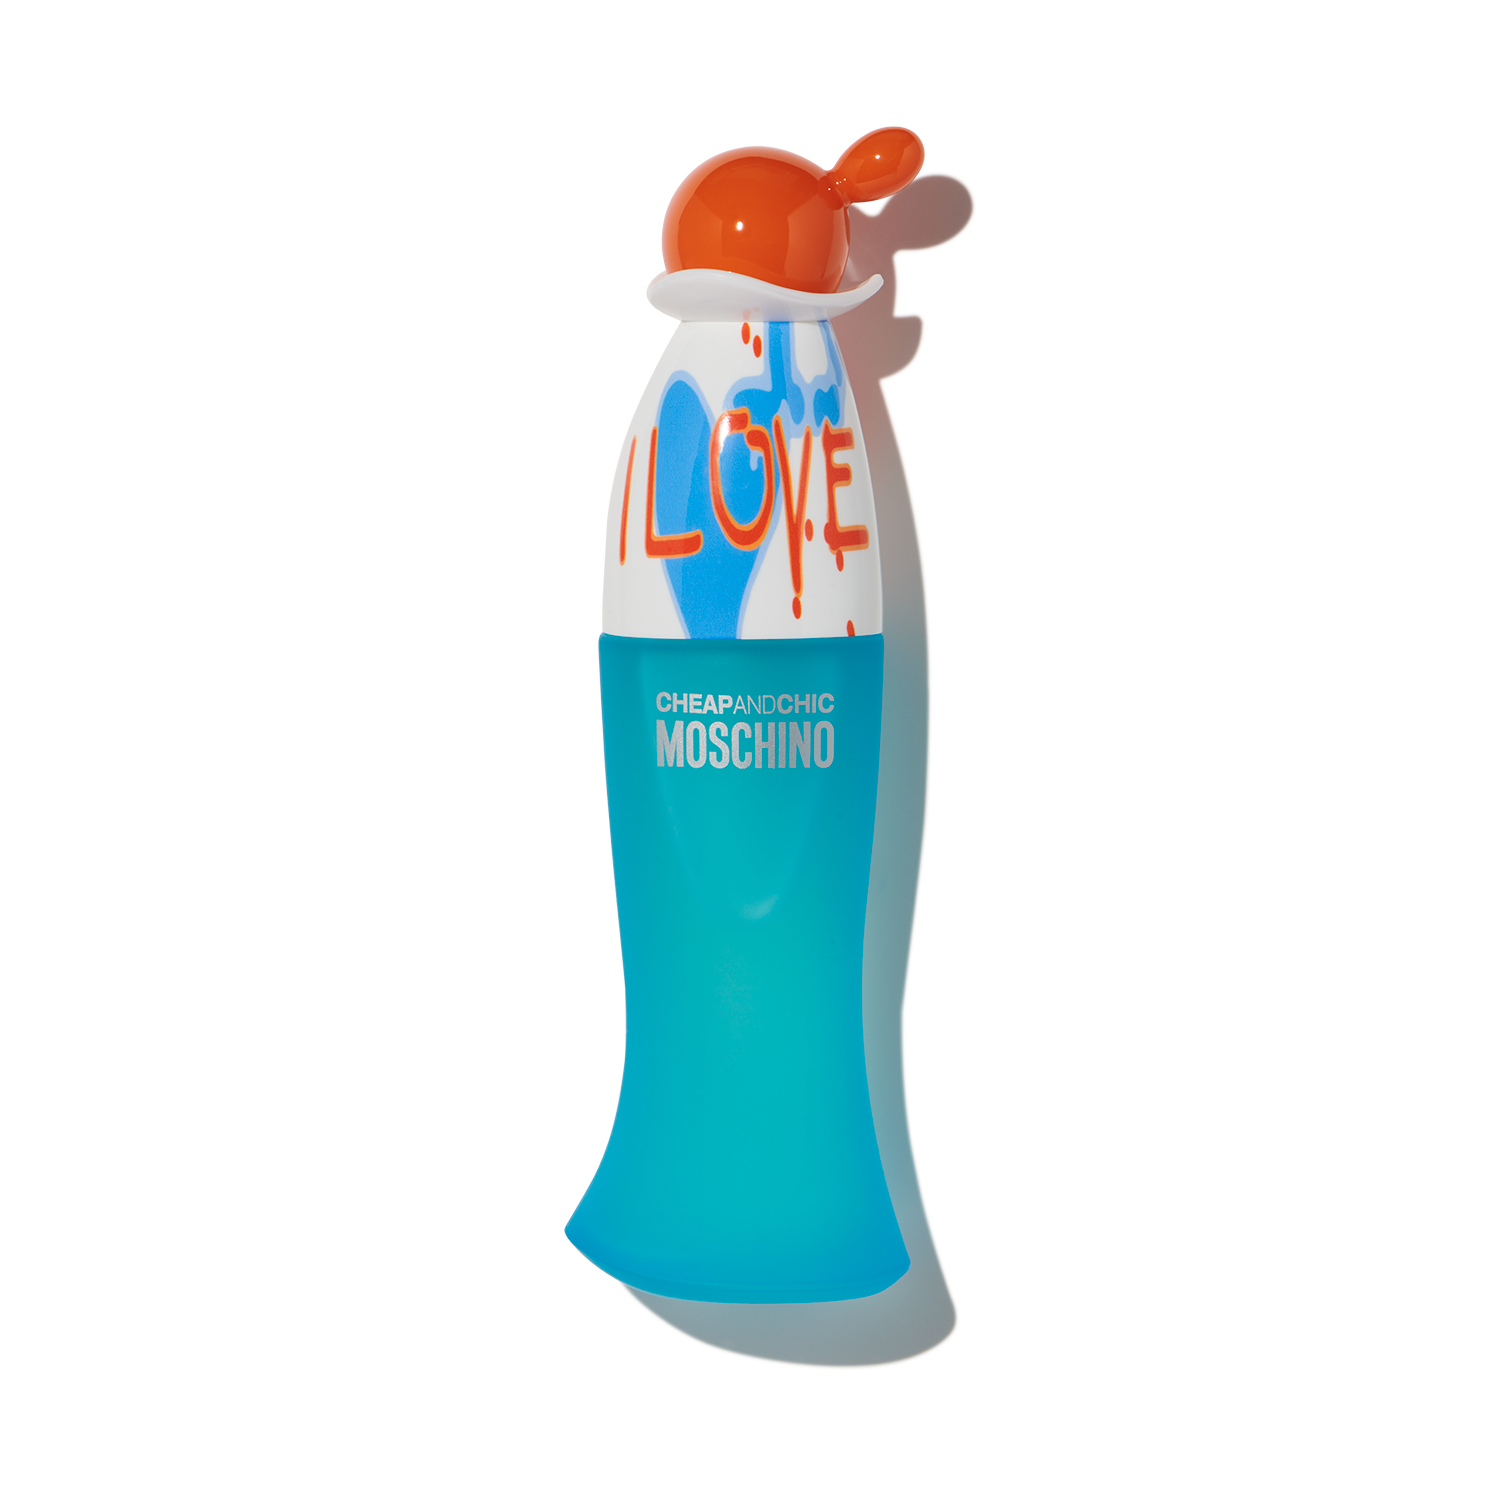 I Love Love by Moschino $16.95/month | Scentbird